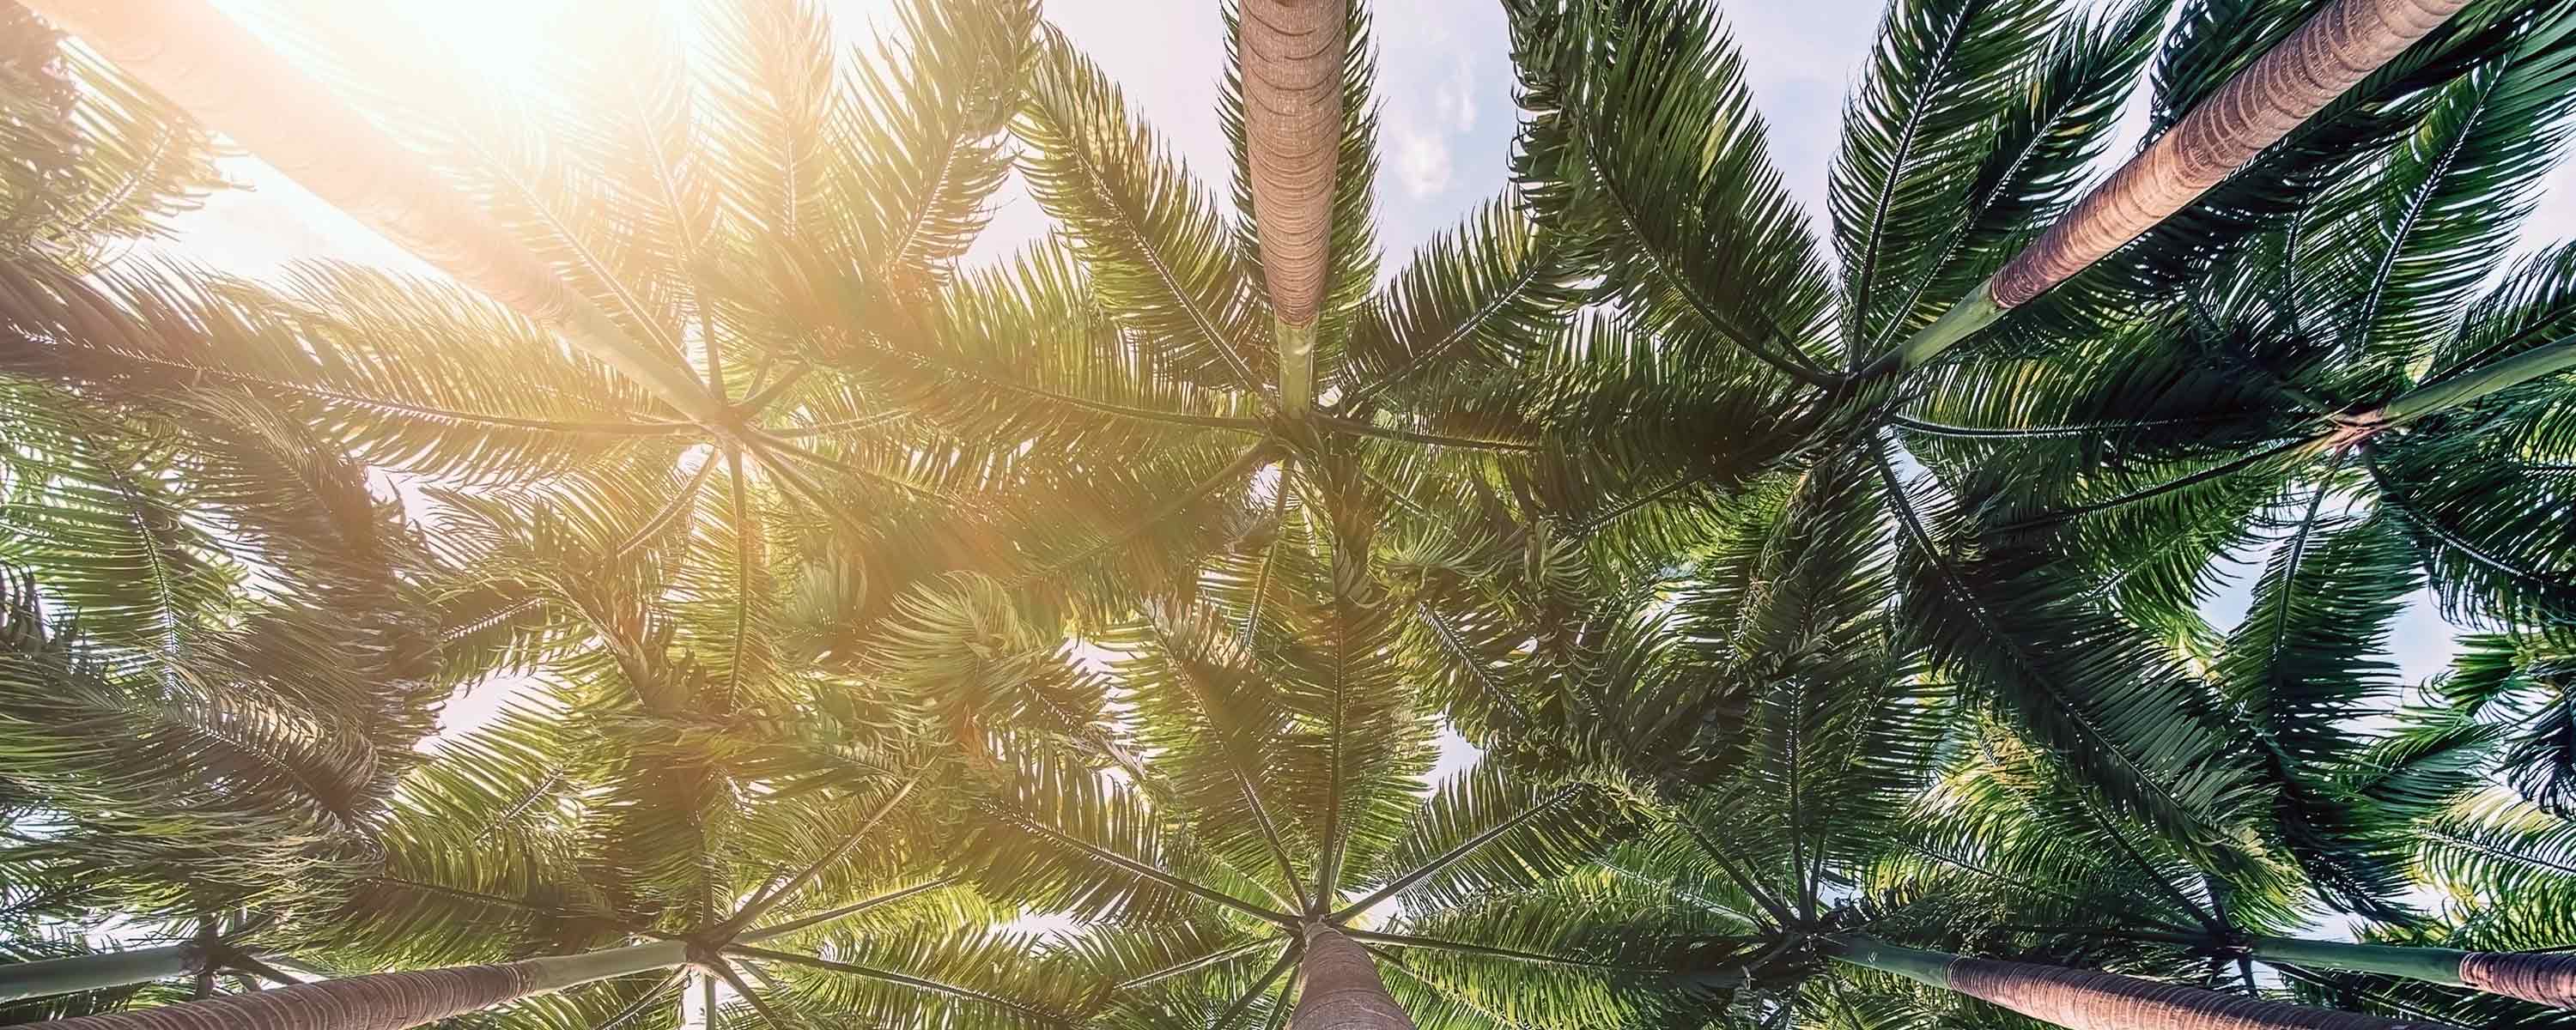 Looking up into palm trees